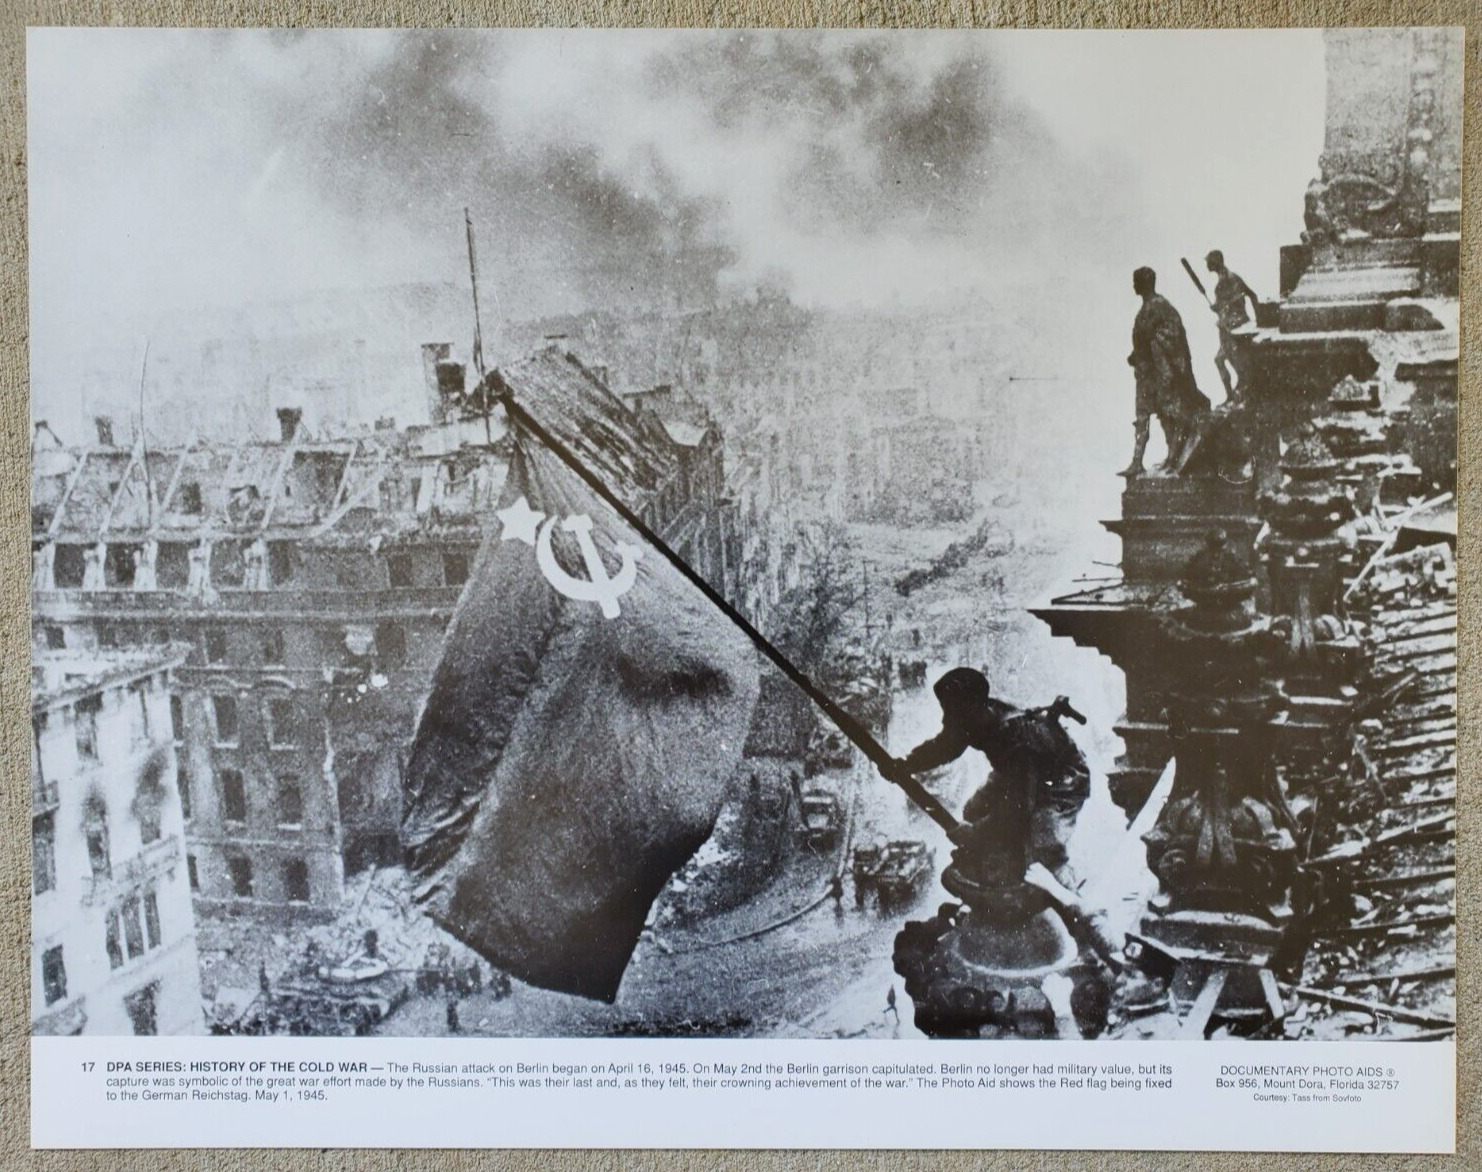 11x14 PHOTO WWII RAISING A VICTORY FLAG OVER THE REICHSTAG BATTLE OF BERLIN